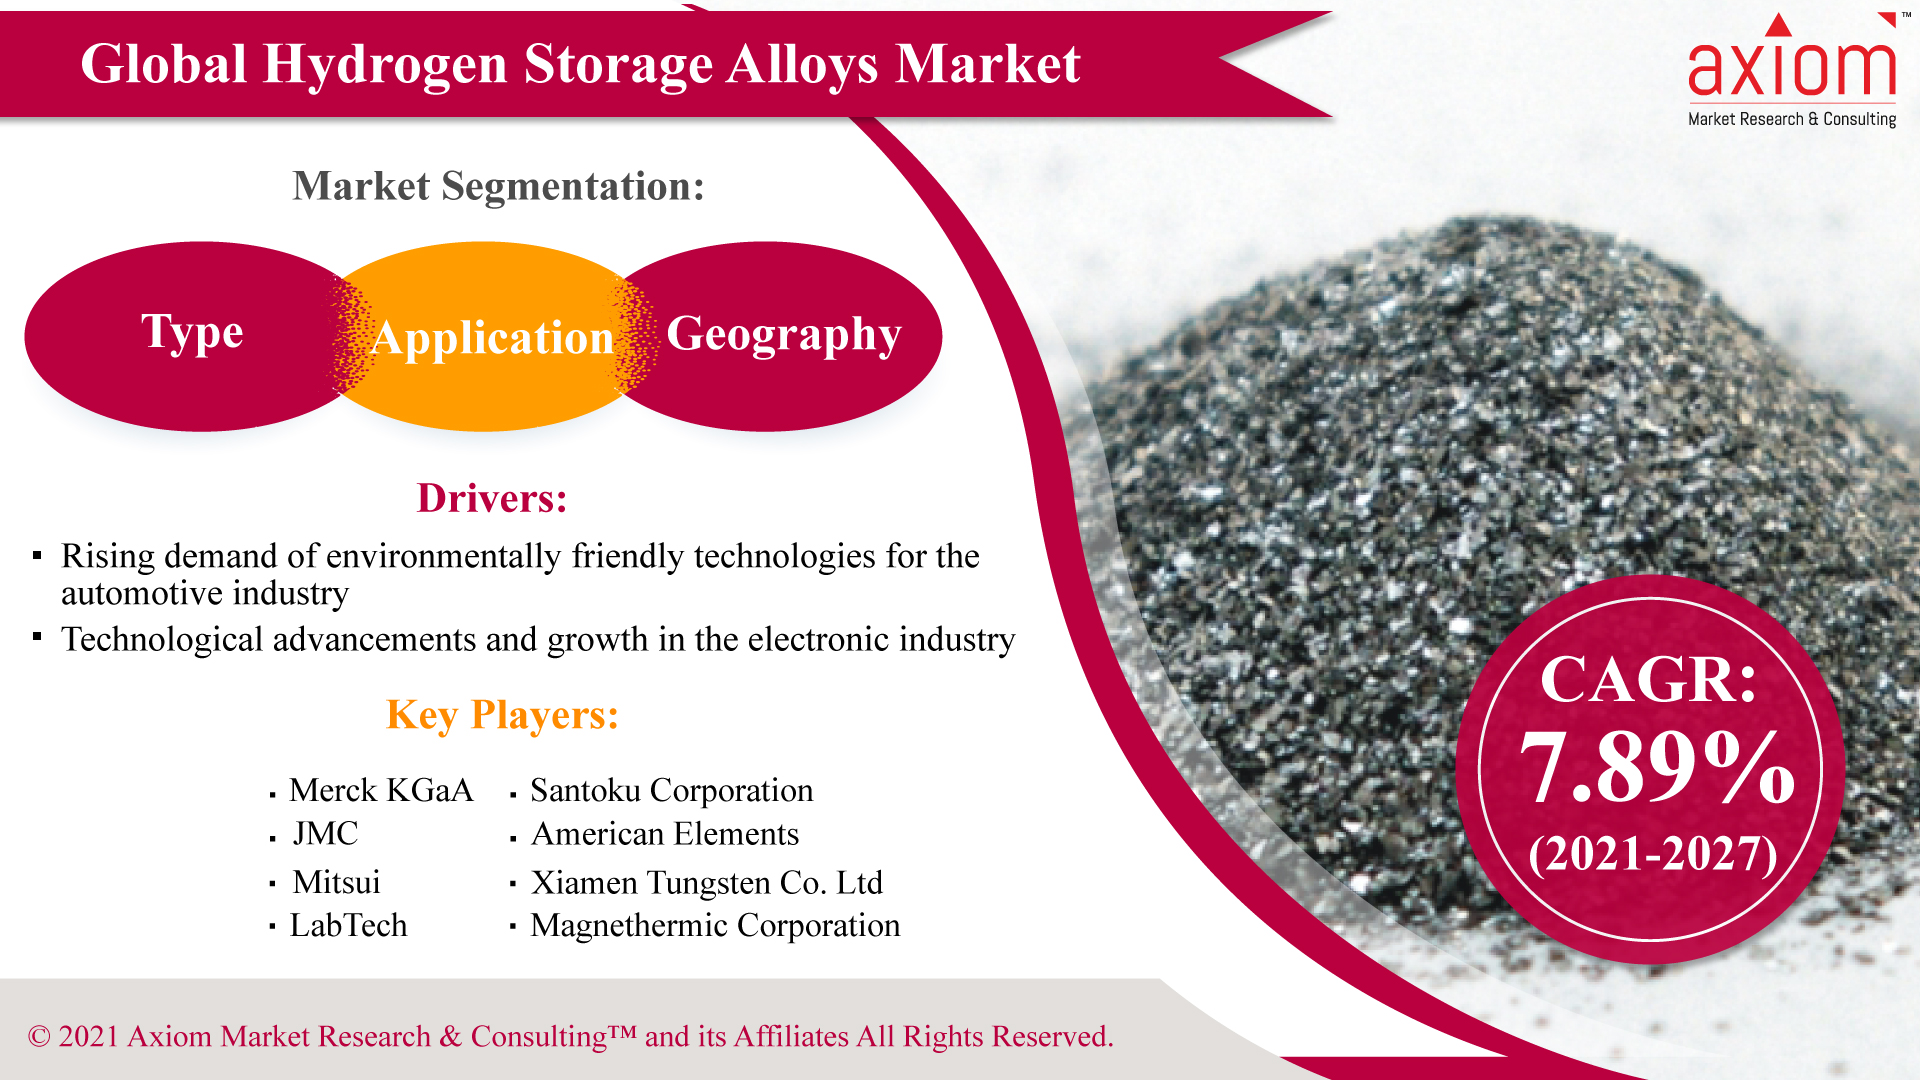 Hydrogen Storage Alloys Market to Witness a CAGR of 7.89% during 2021